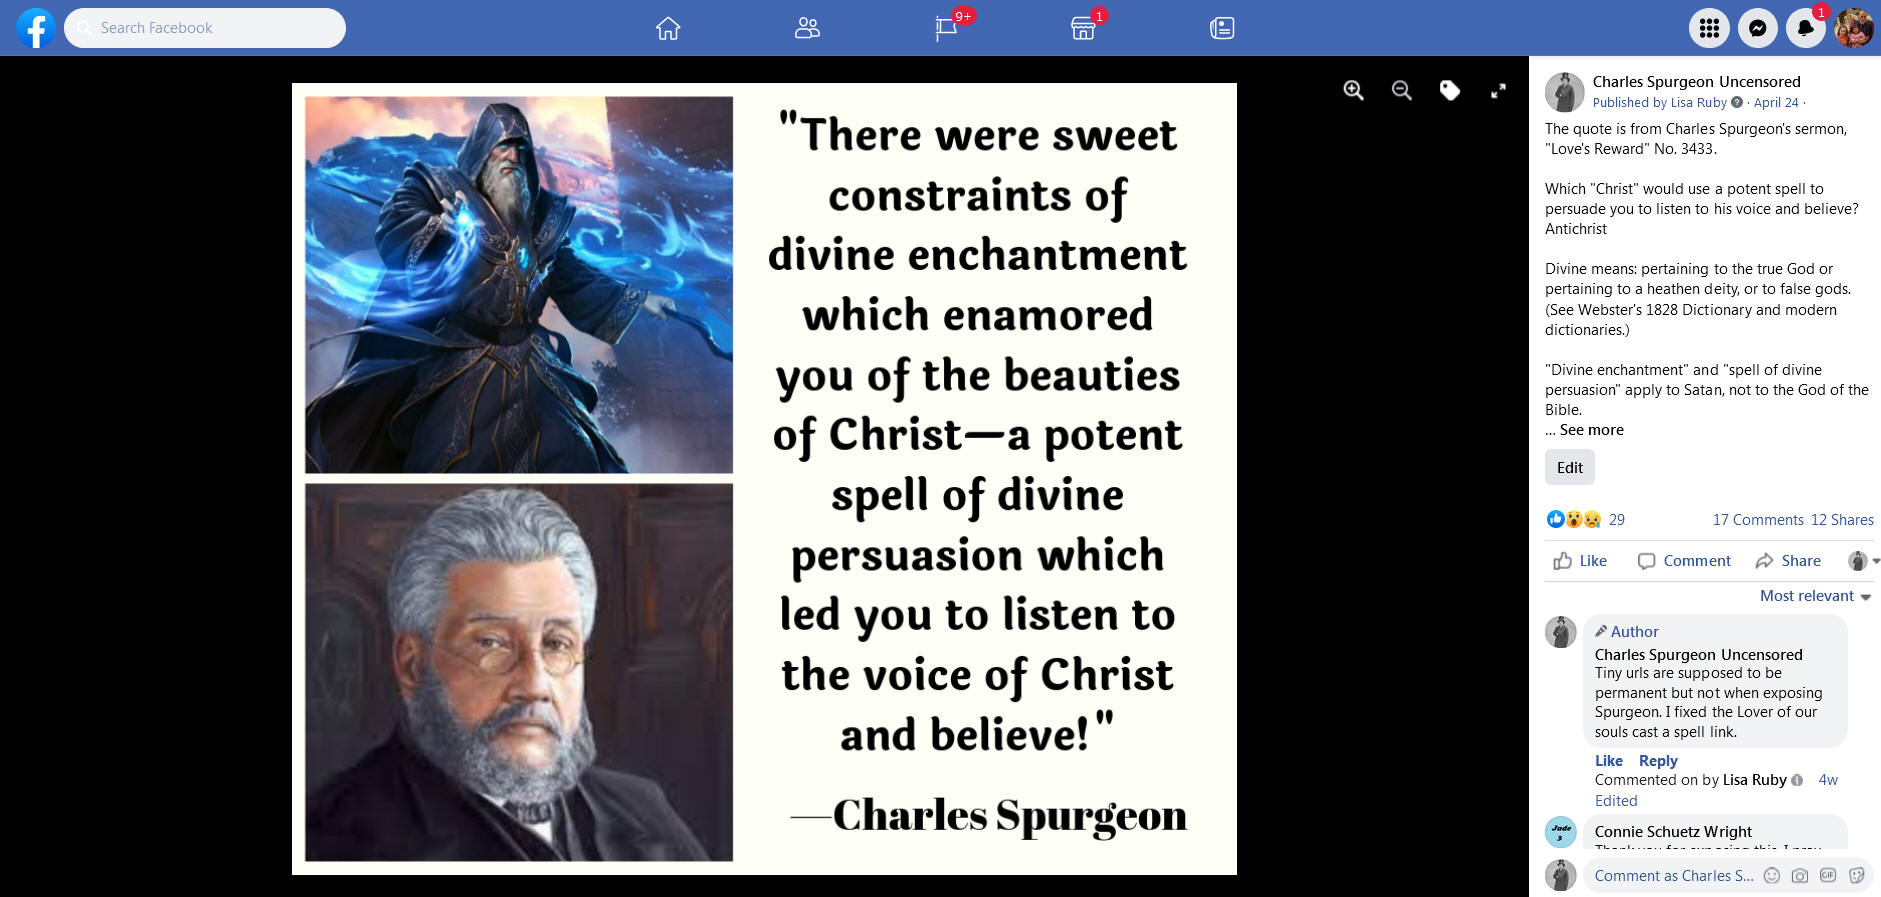 Spurgeon said that a spell of divine persuasion led you to believe in Christ. 